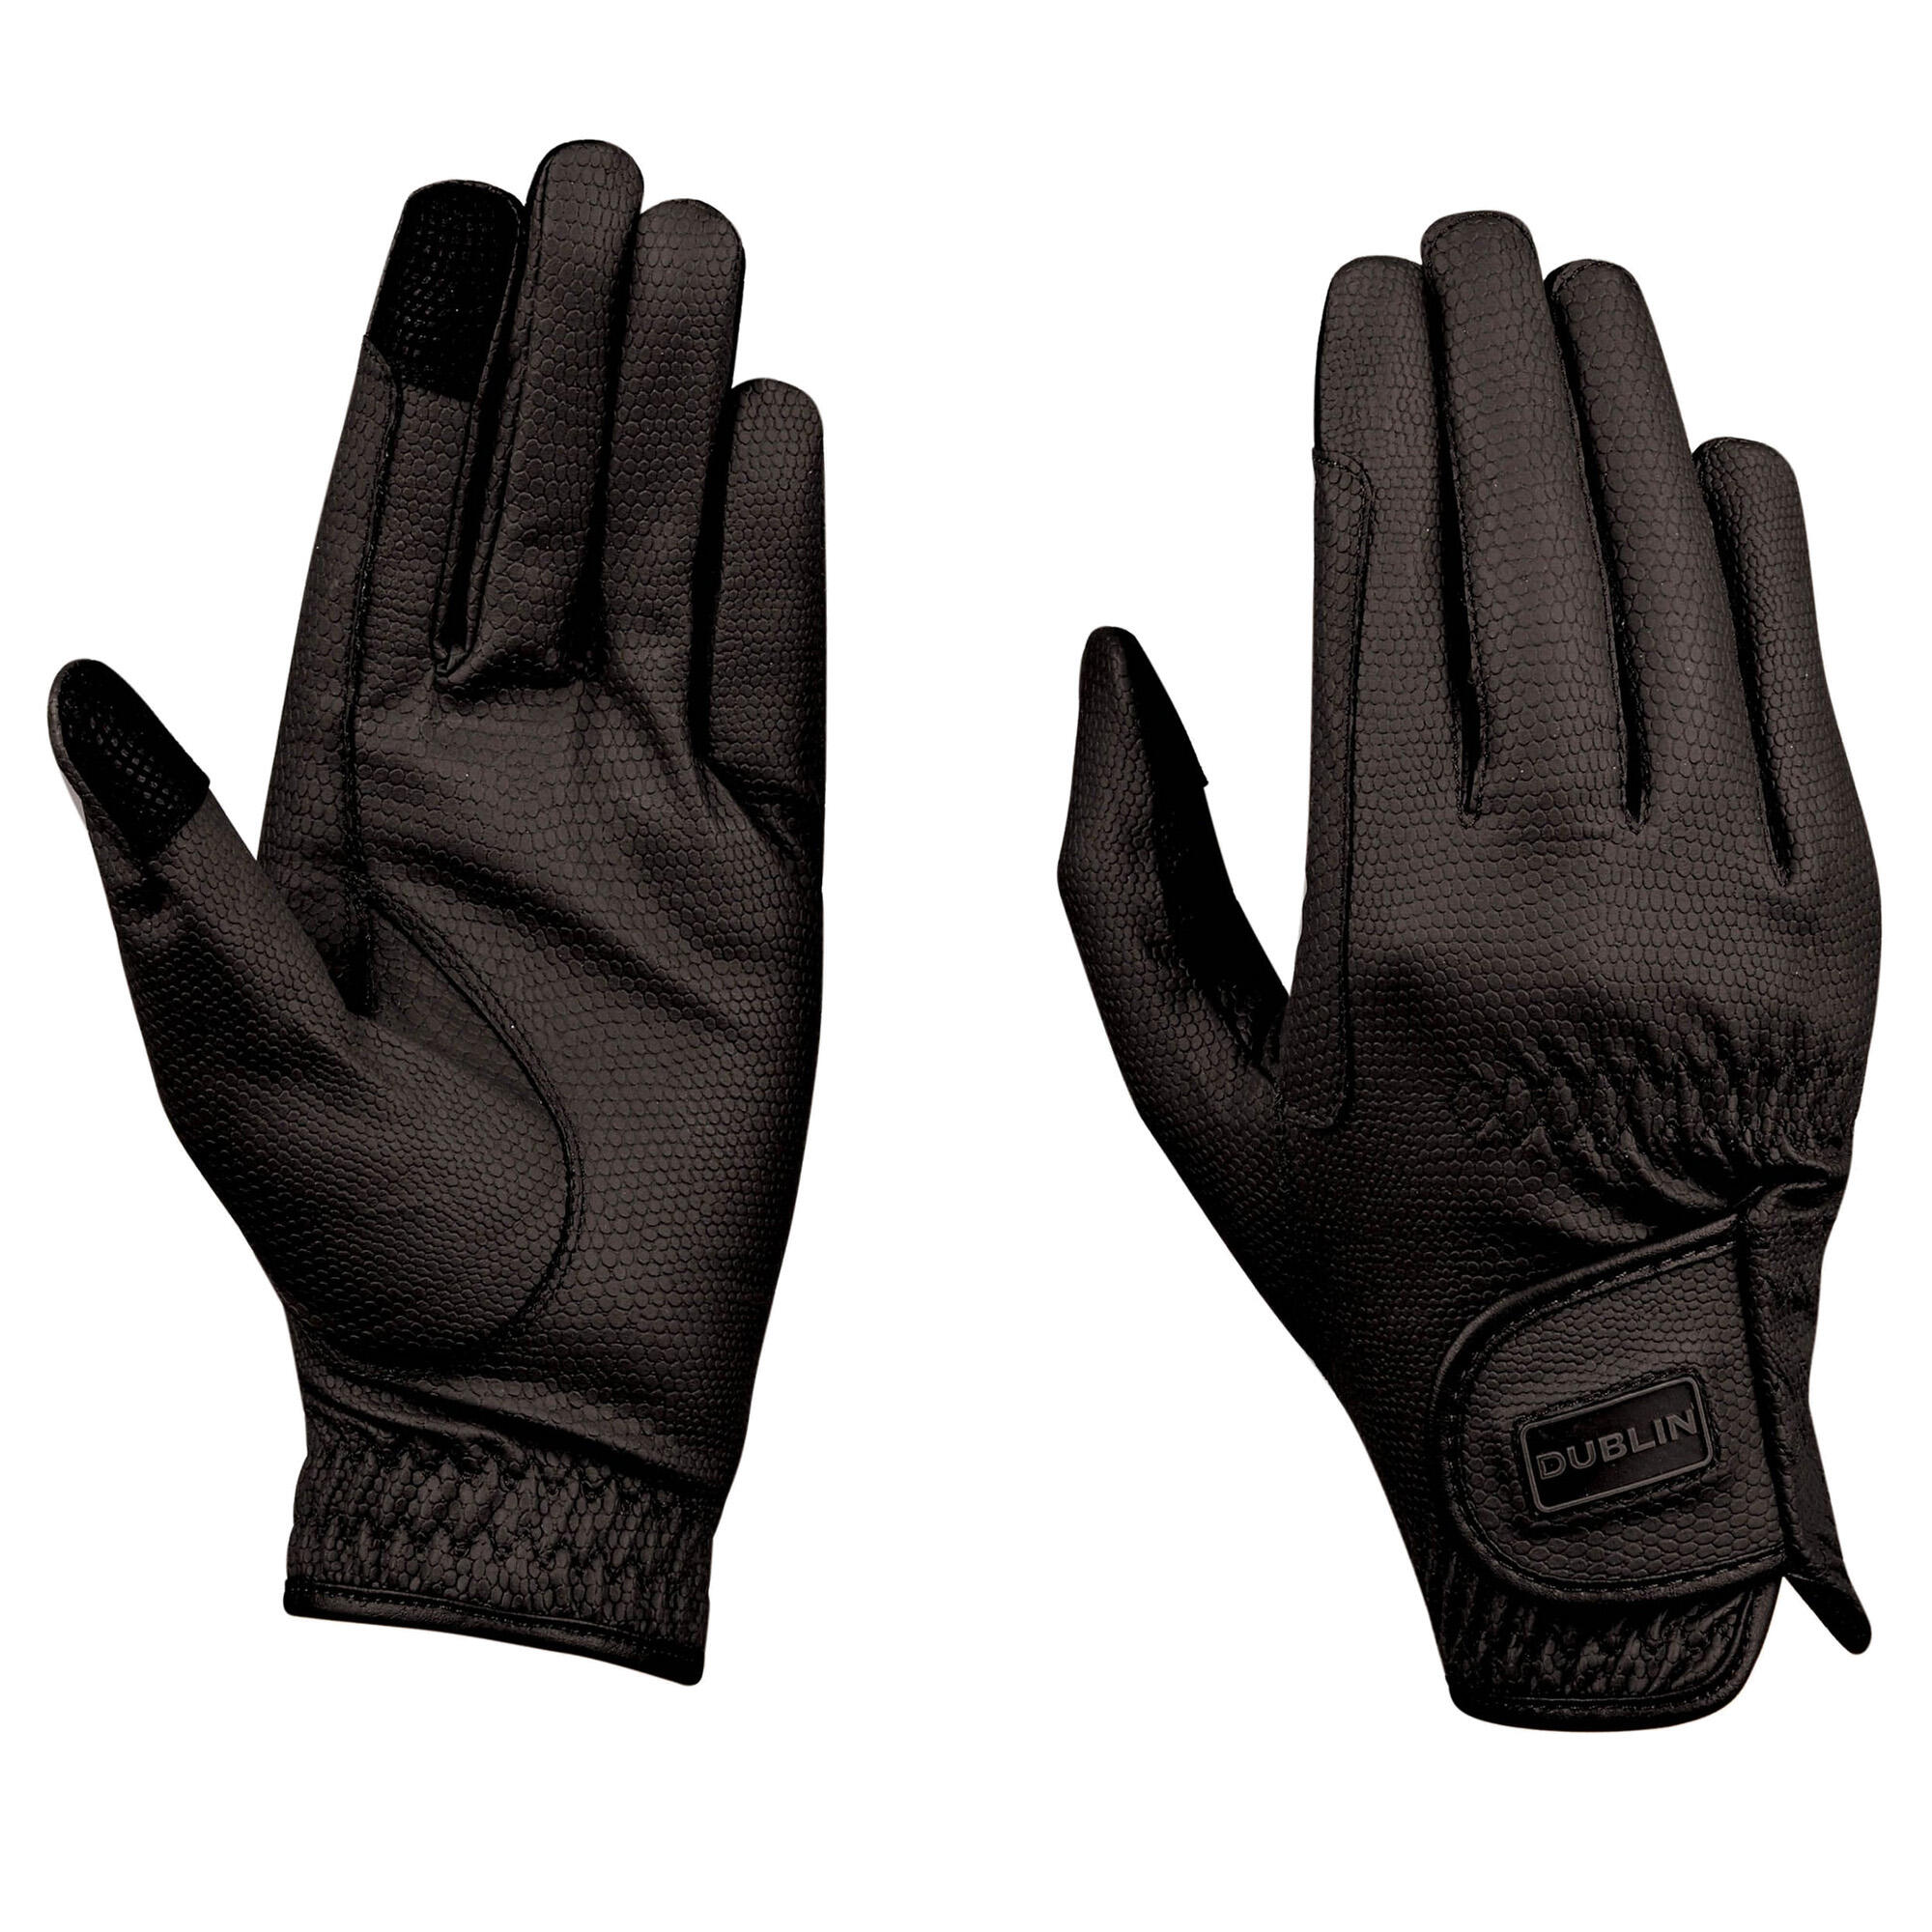 DUBLIN Touch Screen Everyday Riding Gloves (Black)